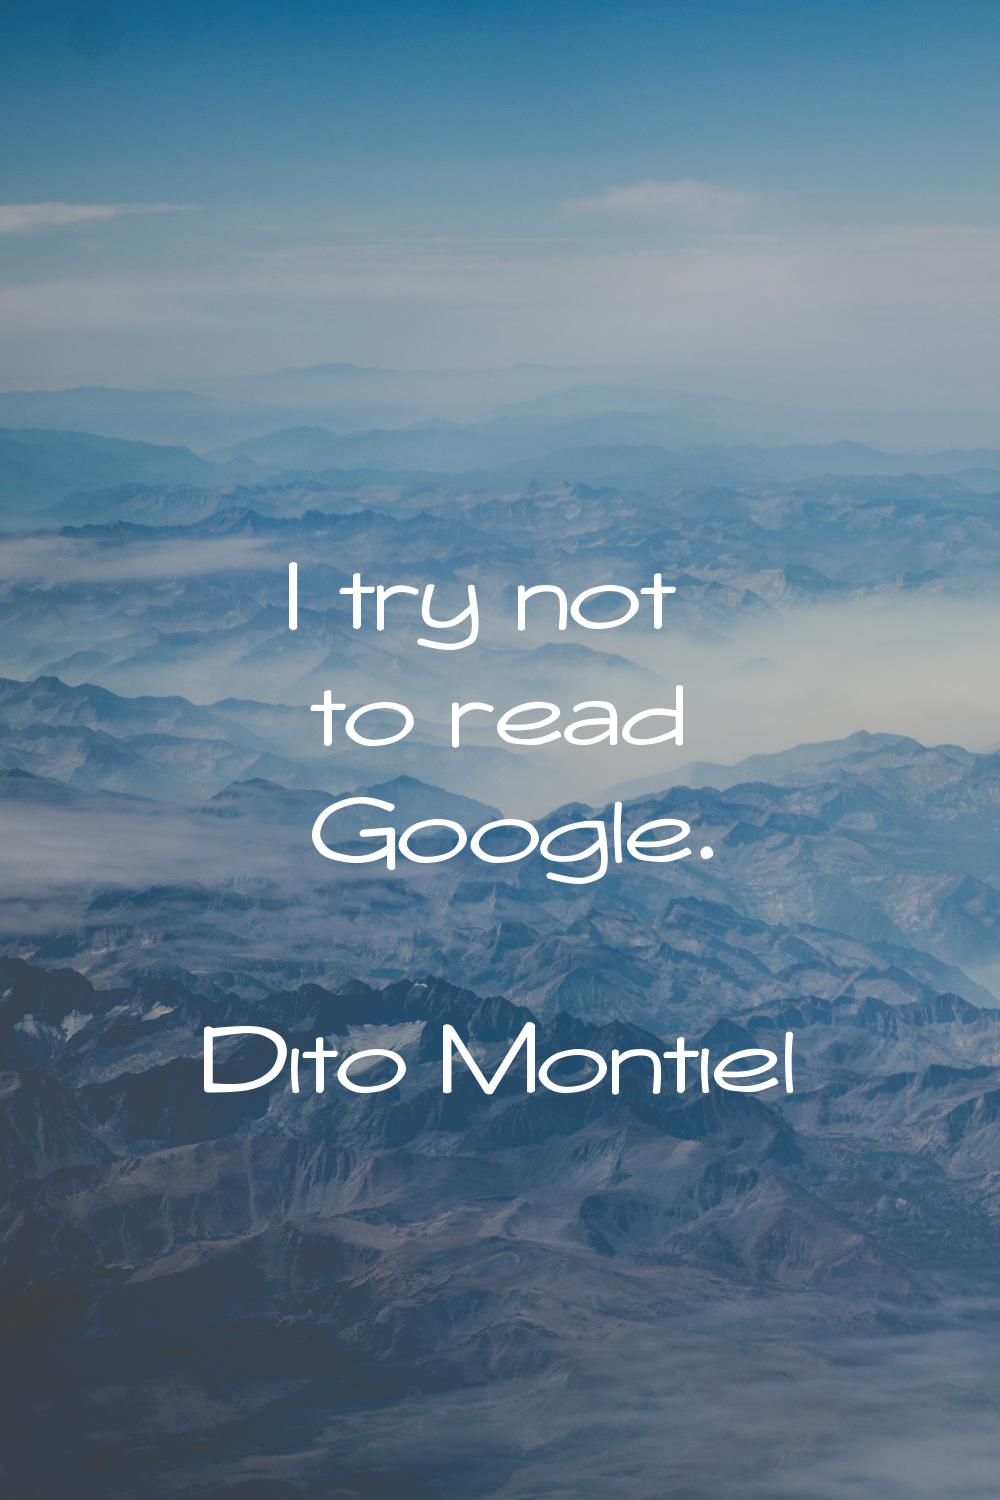 I try not to read Google.